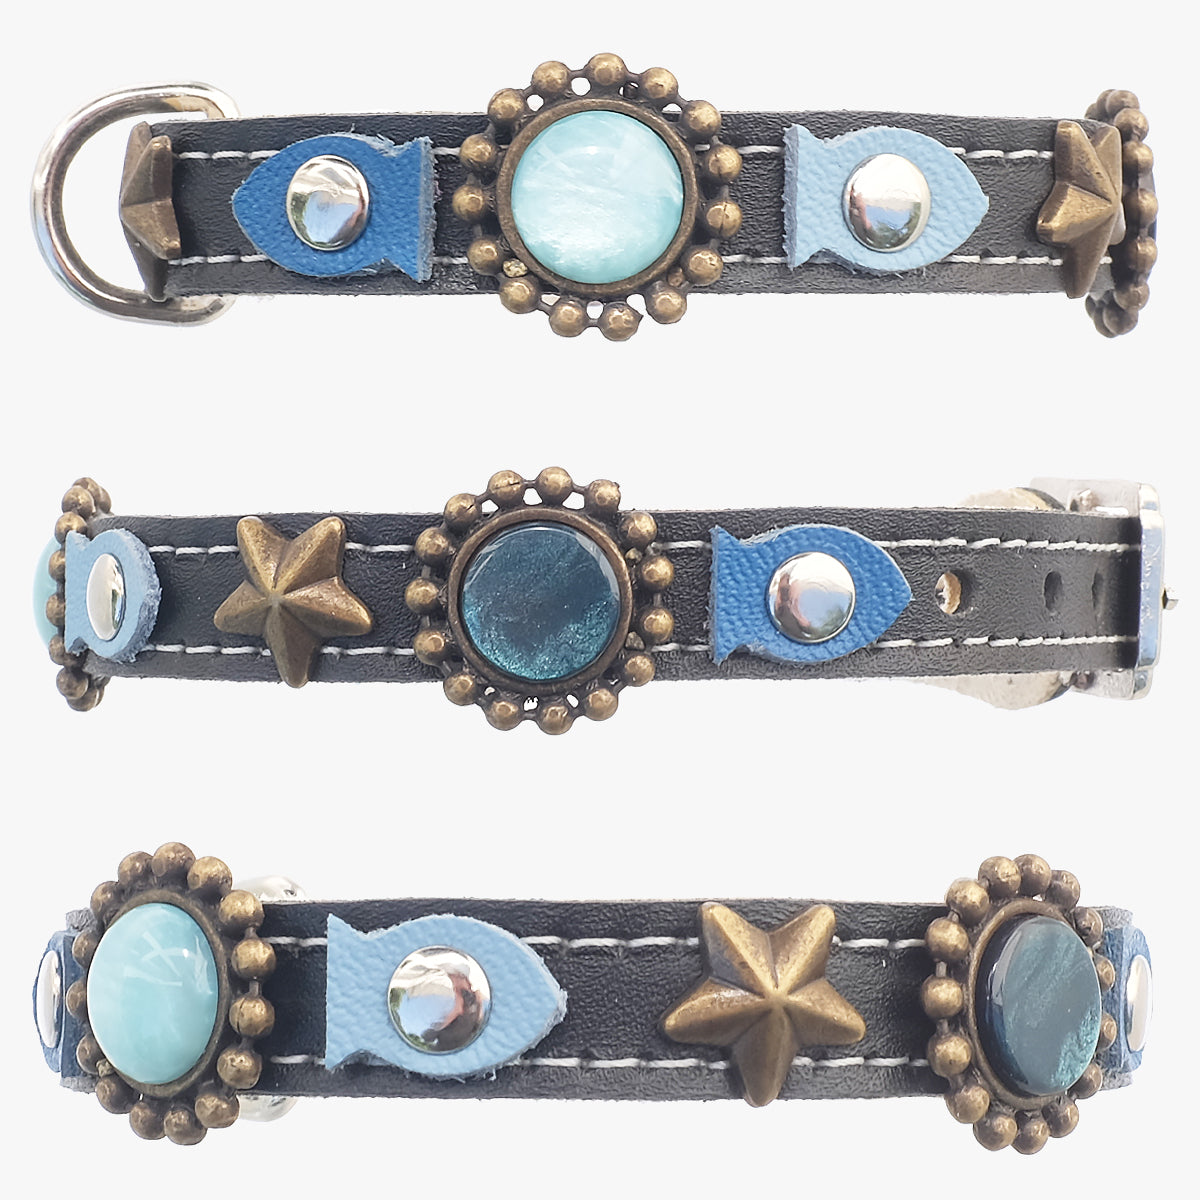 Superpipapo Black Leather Cat Collar, With Studs, Stars, Stones & Blue Fish-Shaped Patches | at Made Moggie